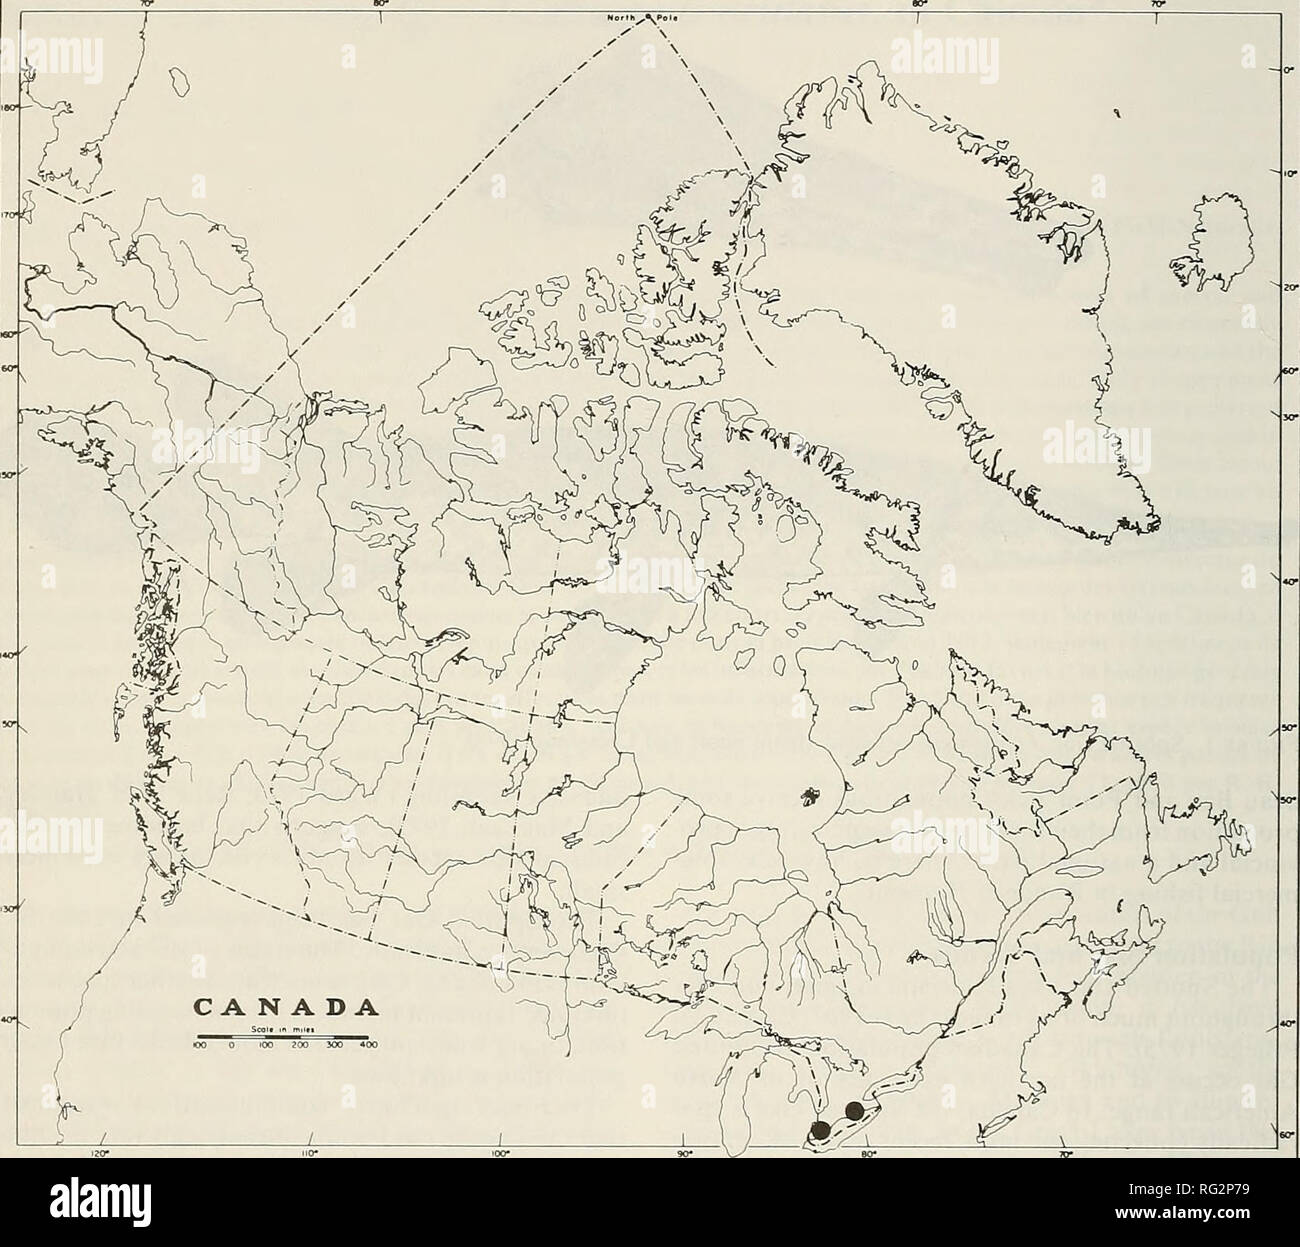 . The Canadian field-naturalist. 82 The Canadian Field-Naturalist Vol. 98. Figure 2. Canadian distribution of Spotted Gar (Lepisosteus oculatus). Courtesy of D. E. McAllister, National Museum of Natural Sciences. clays, detritus, and soft muck. A single capture site in Rondeau Bay had a gravel-and-stone bottom devoid of aquatic macrophytes; however, dense aquatic vege- tation was present a few hundred meters from the site. Typically, aquatic vegetation was dense at capture sites. Spatterdock (Nuphar sp.). Cattails (Typha sp.) and Waterweed (Anacharus sp.) were abundant. Tur- bidity varied amon Stock Photo